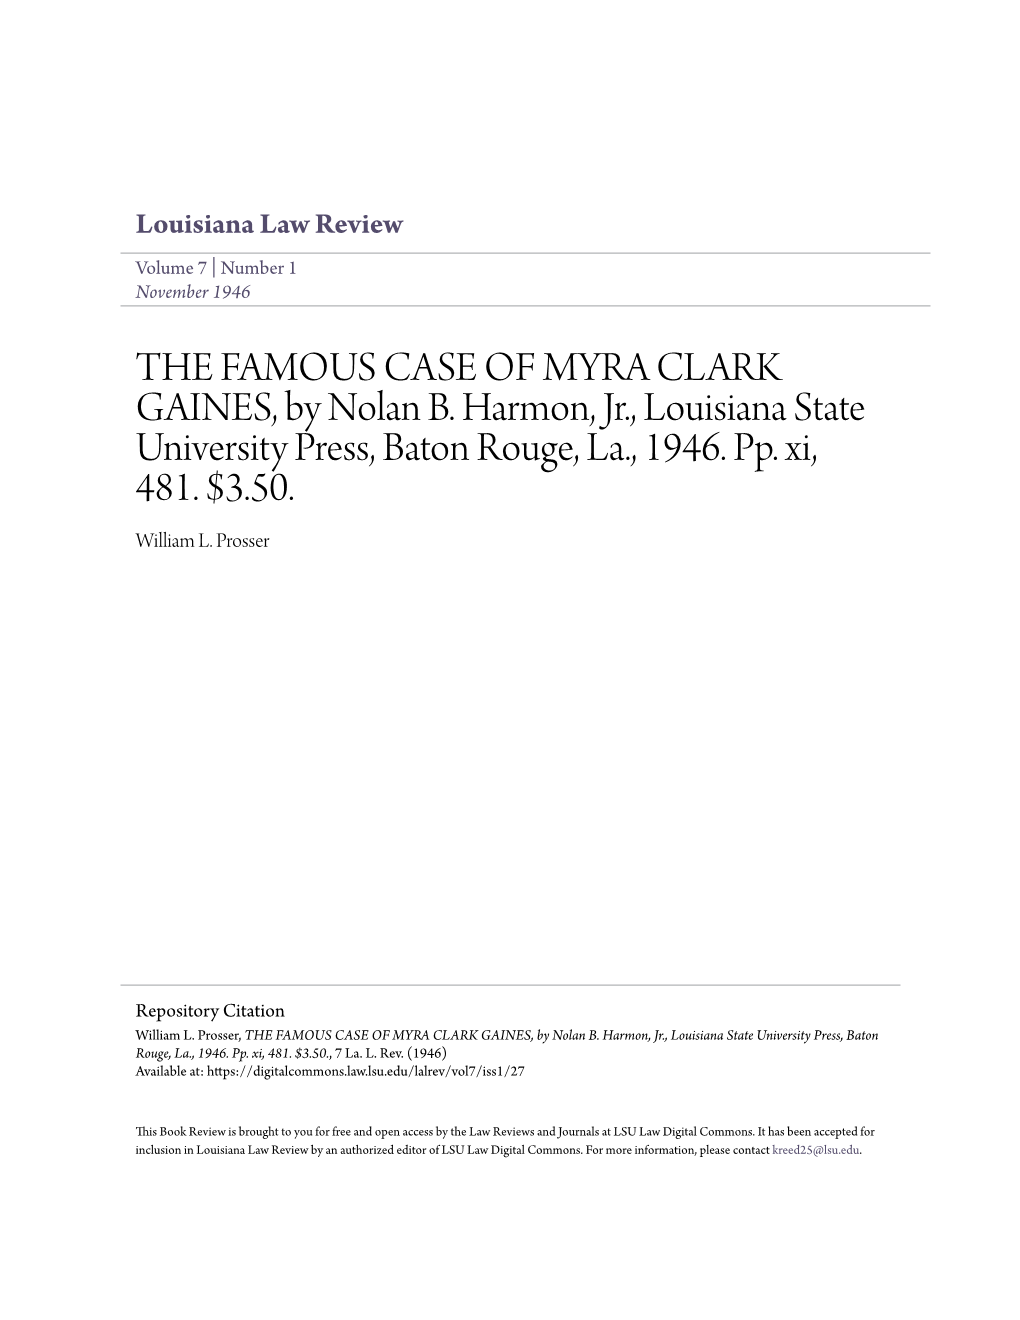 THE FAMOUS CASE of MYRA CLARK GAINES, by Nolan B